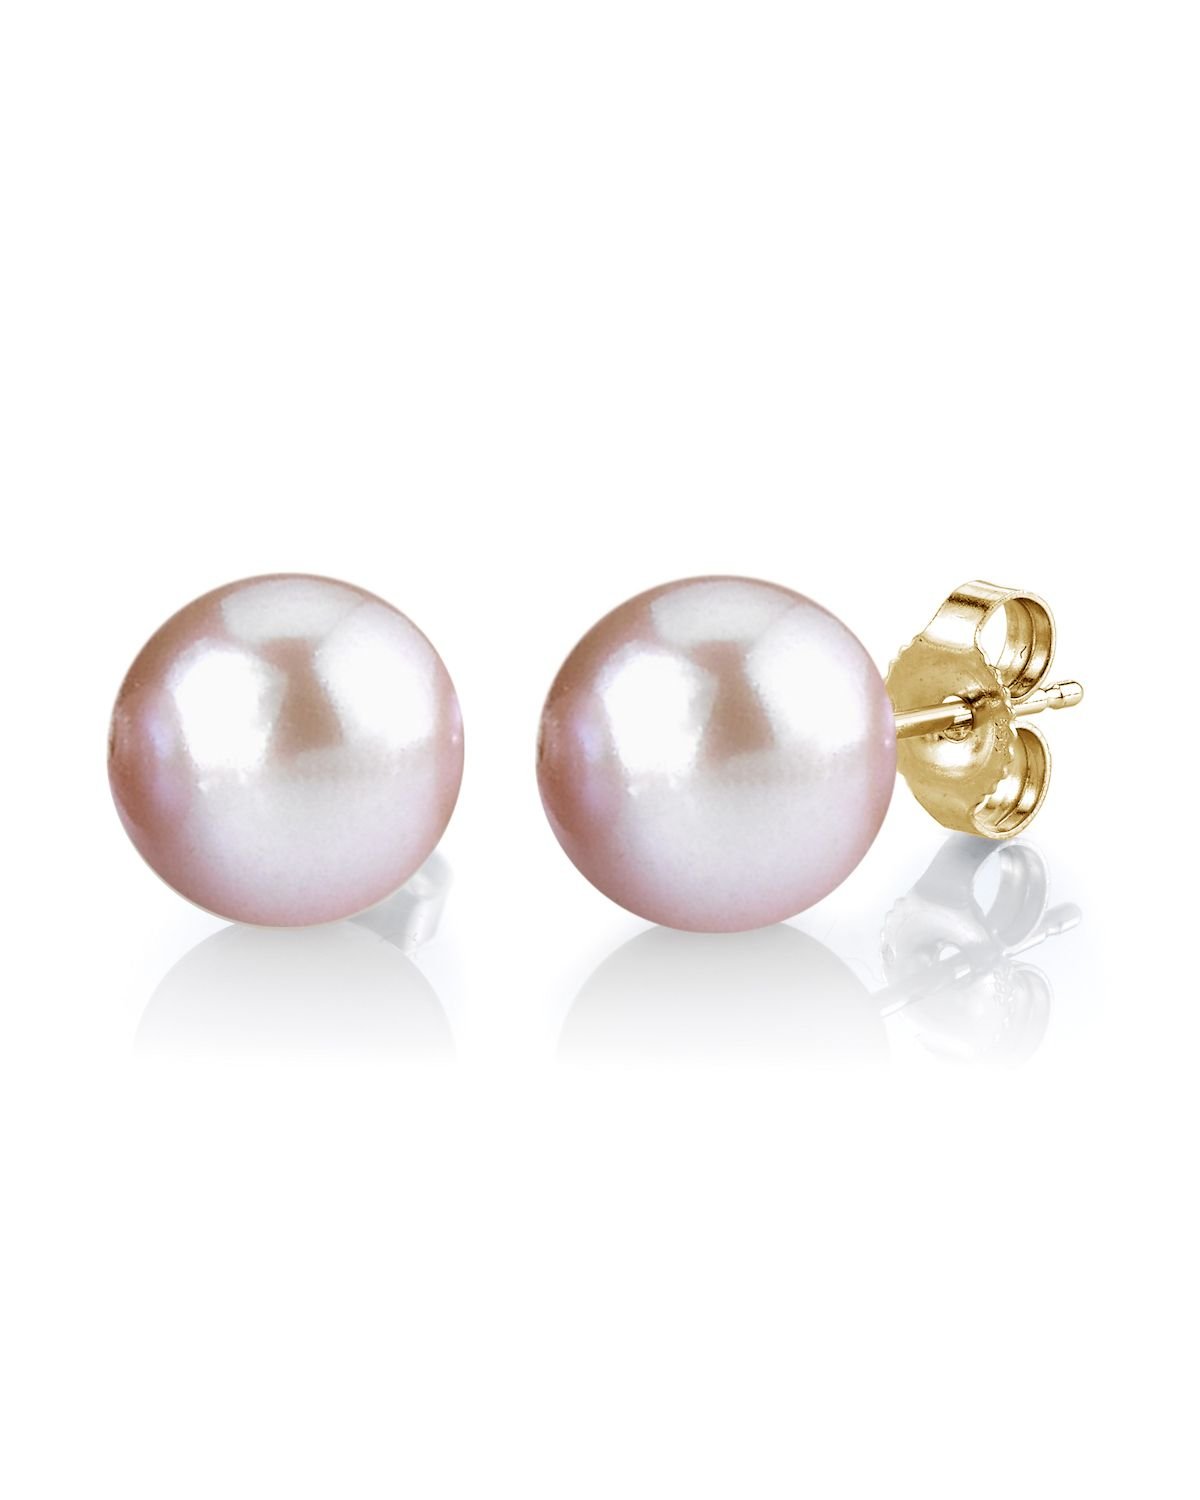 Stud earrings - Metal, glass pearls & strass, gold, pink, pearly white &  crystal — Fashion